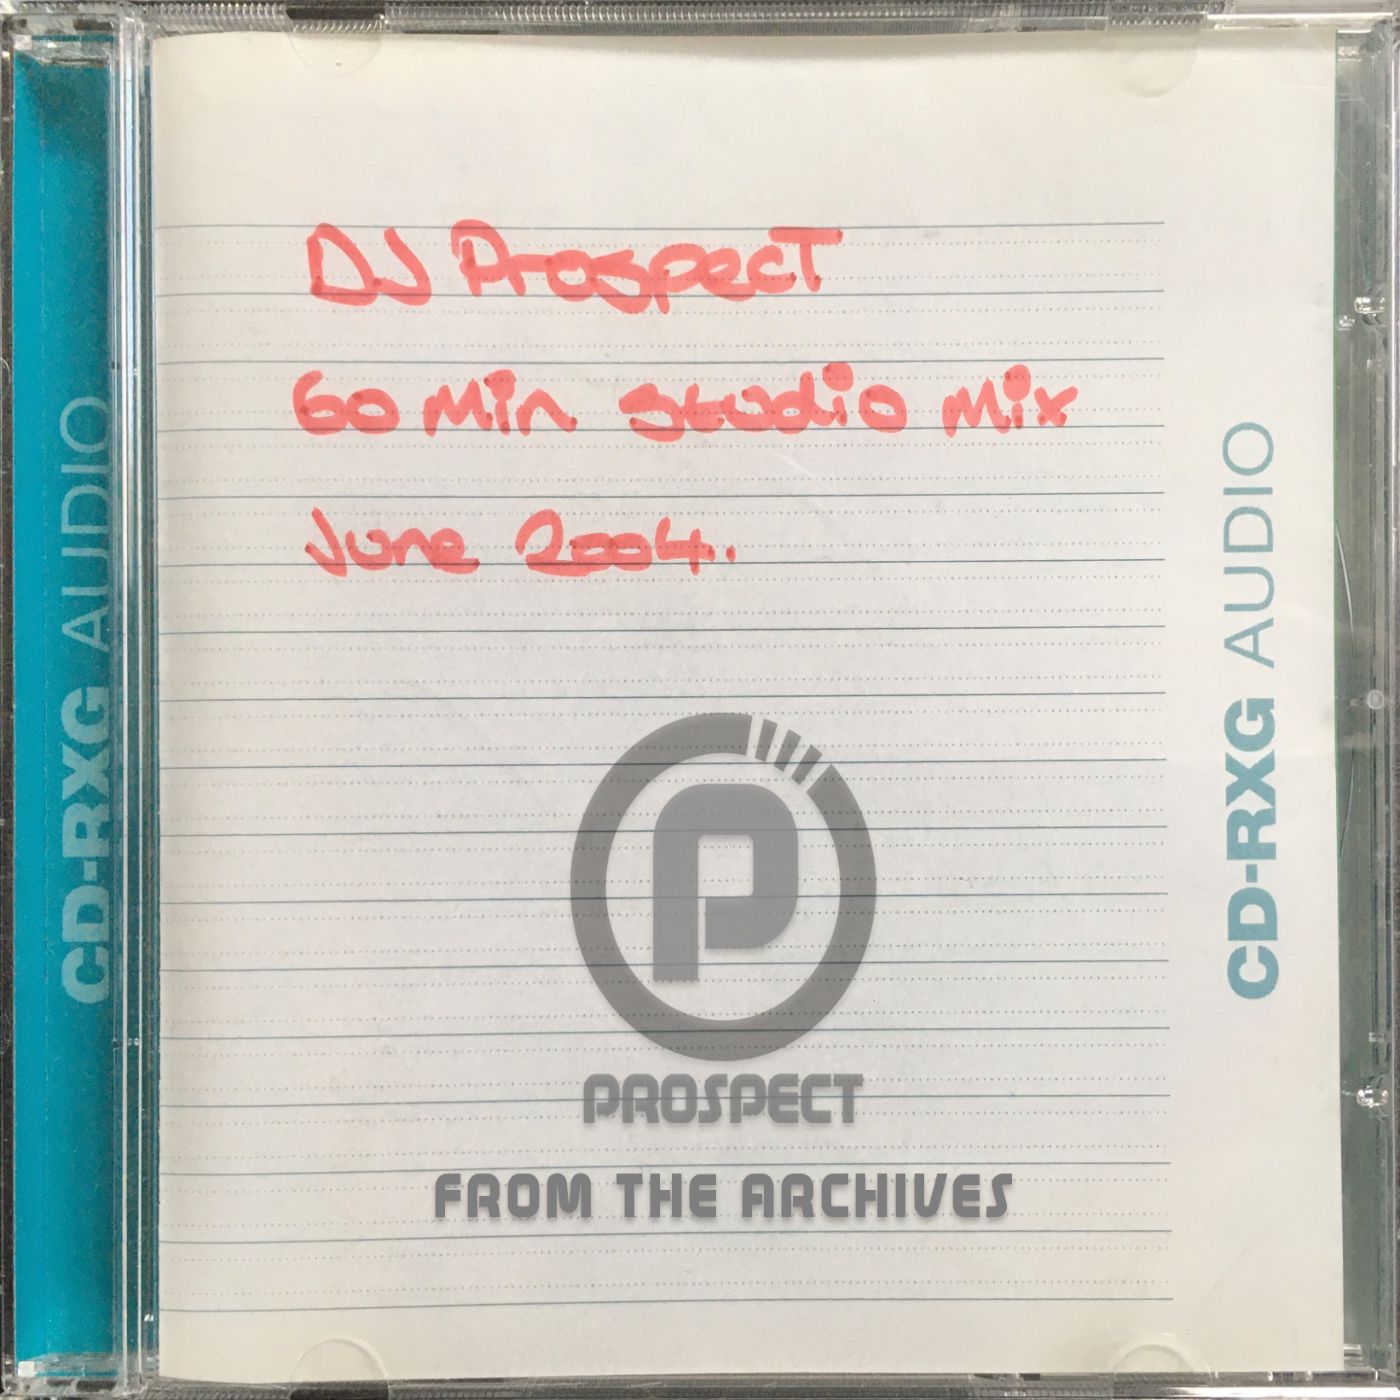 DJ PROSPECT - DRUM AND BASS STUDIO MIX - FROM THE ARCHIVES 2004